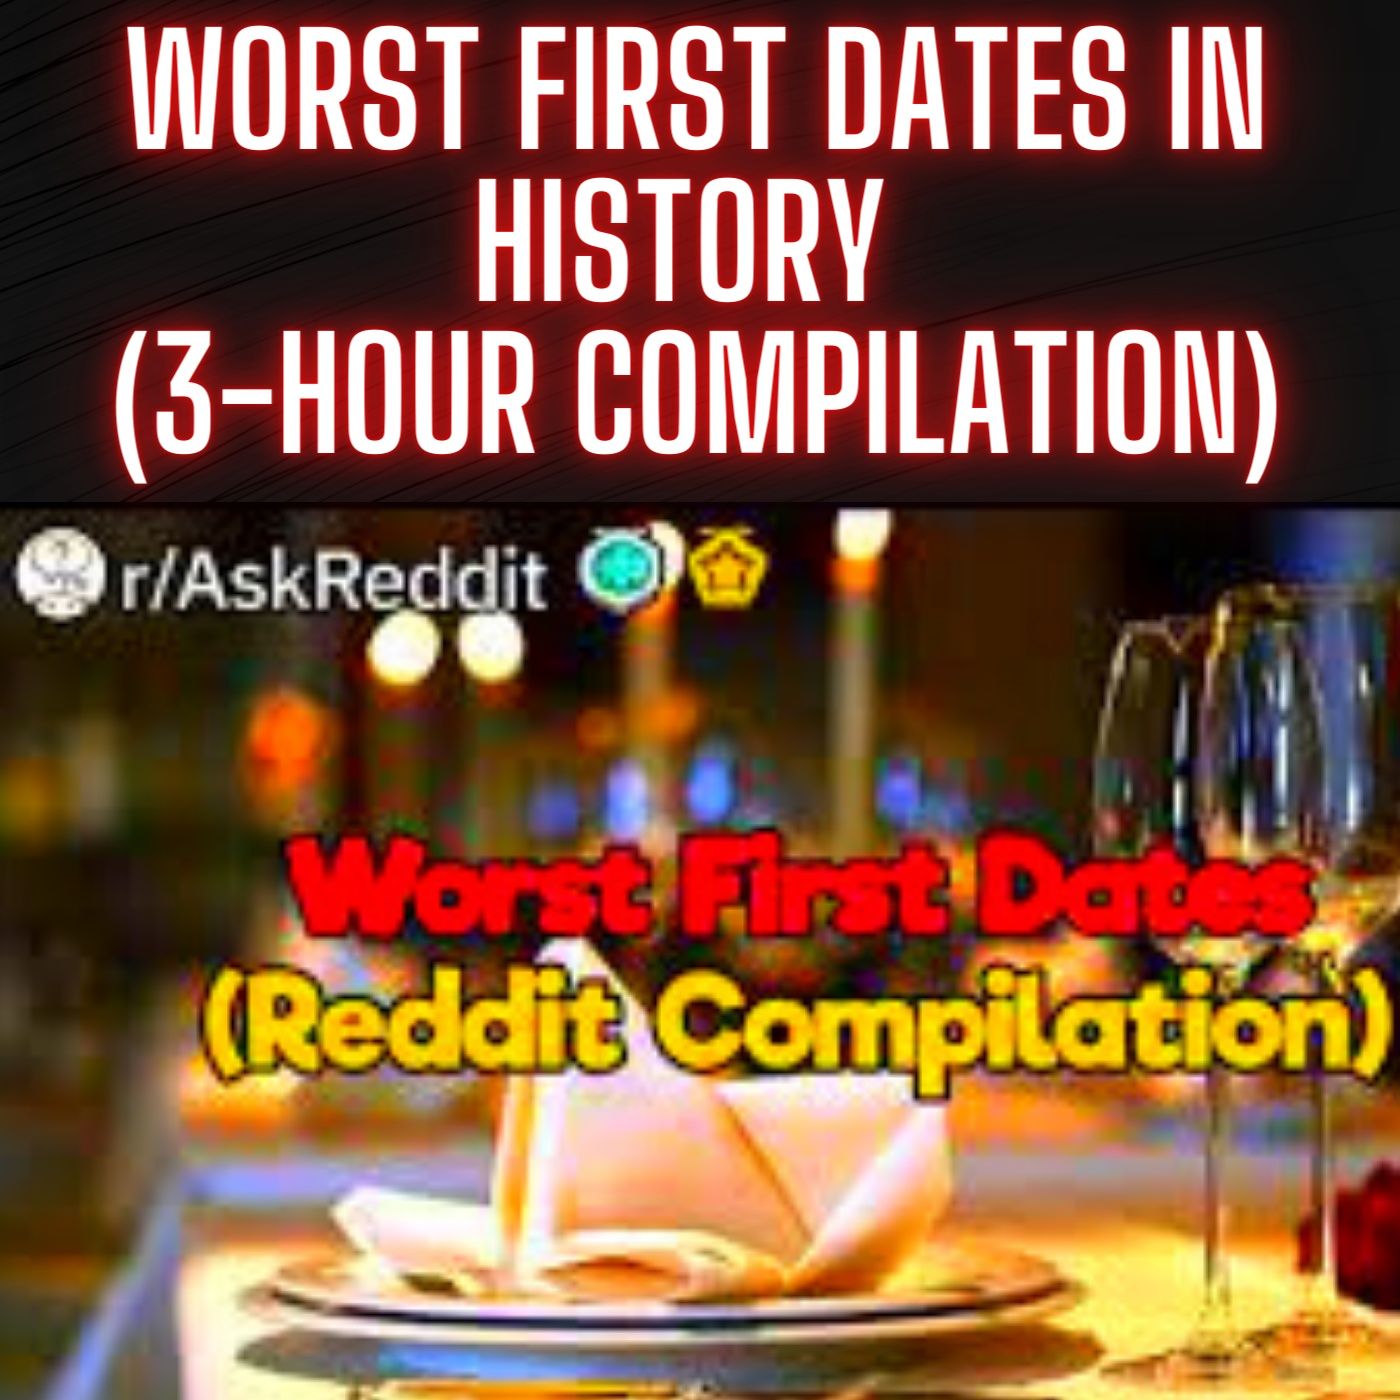 Worst First Dates in History (3-Hour Compilation)